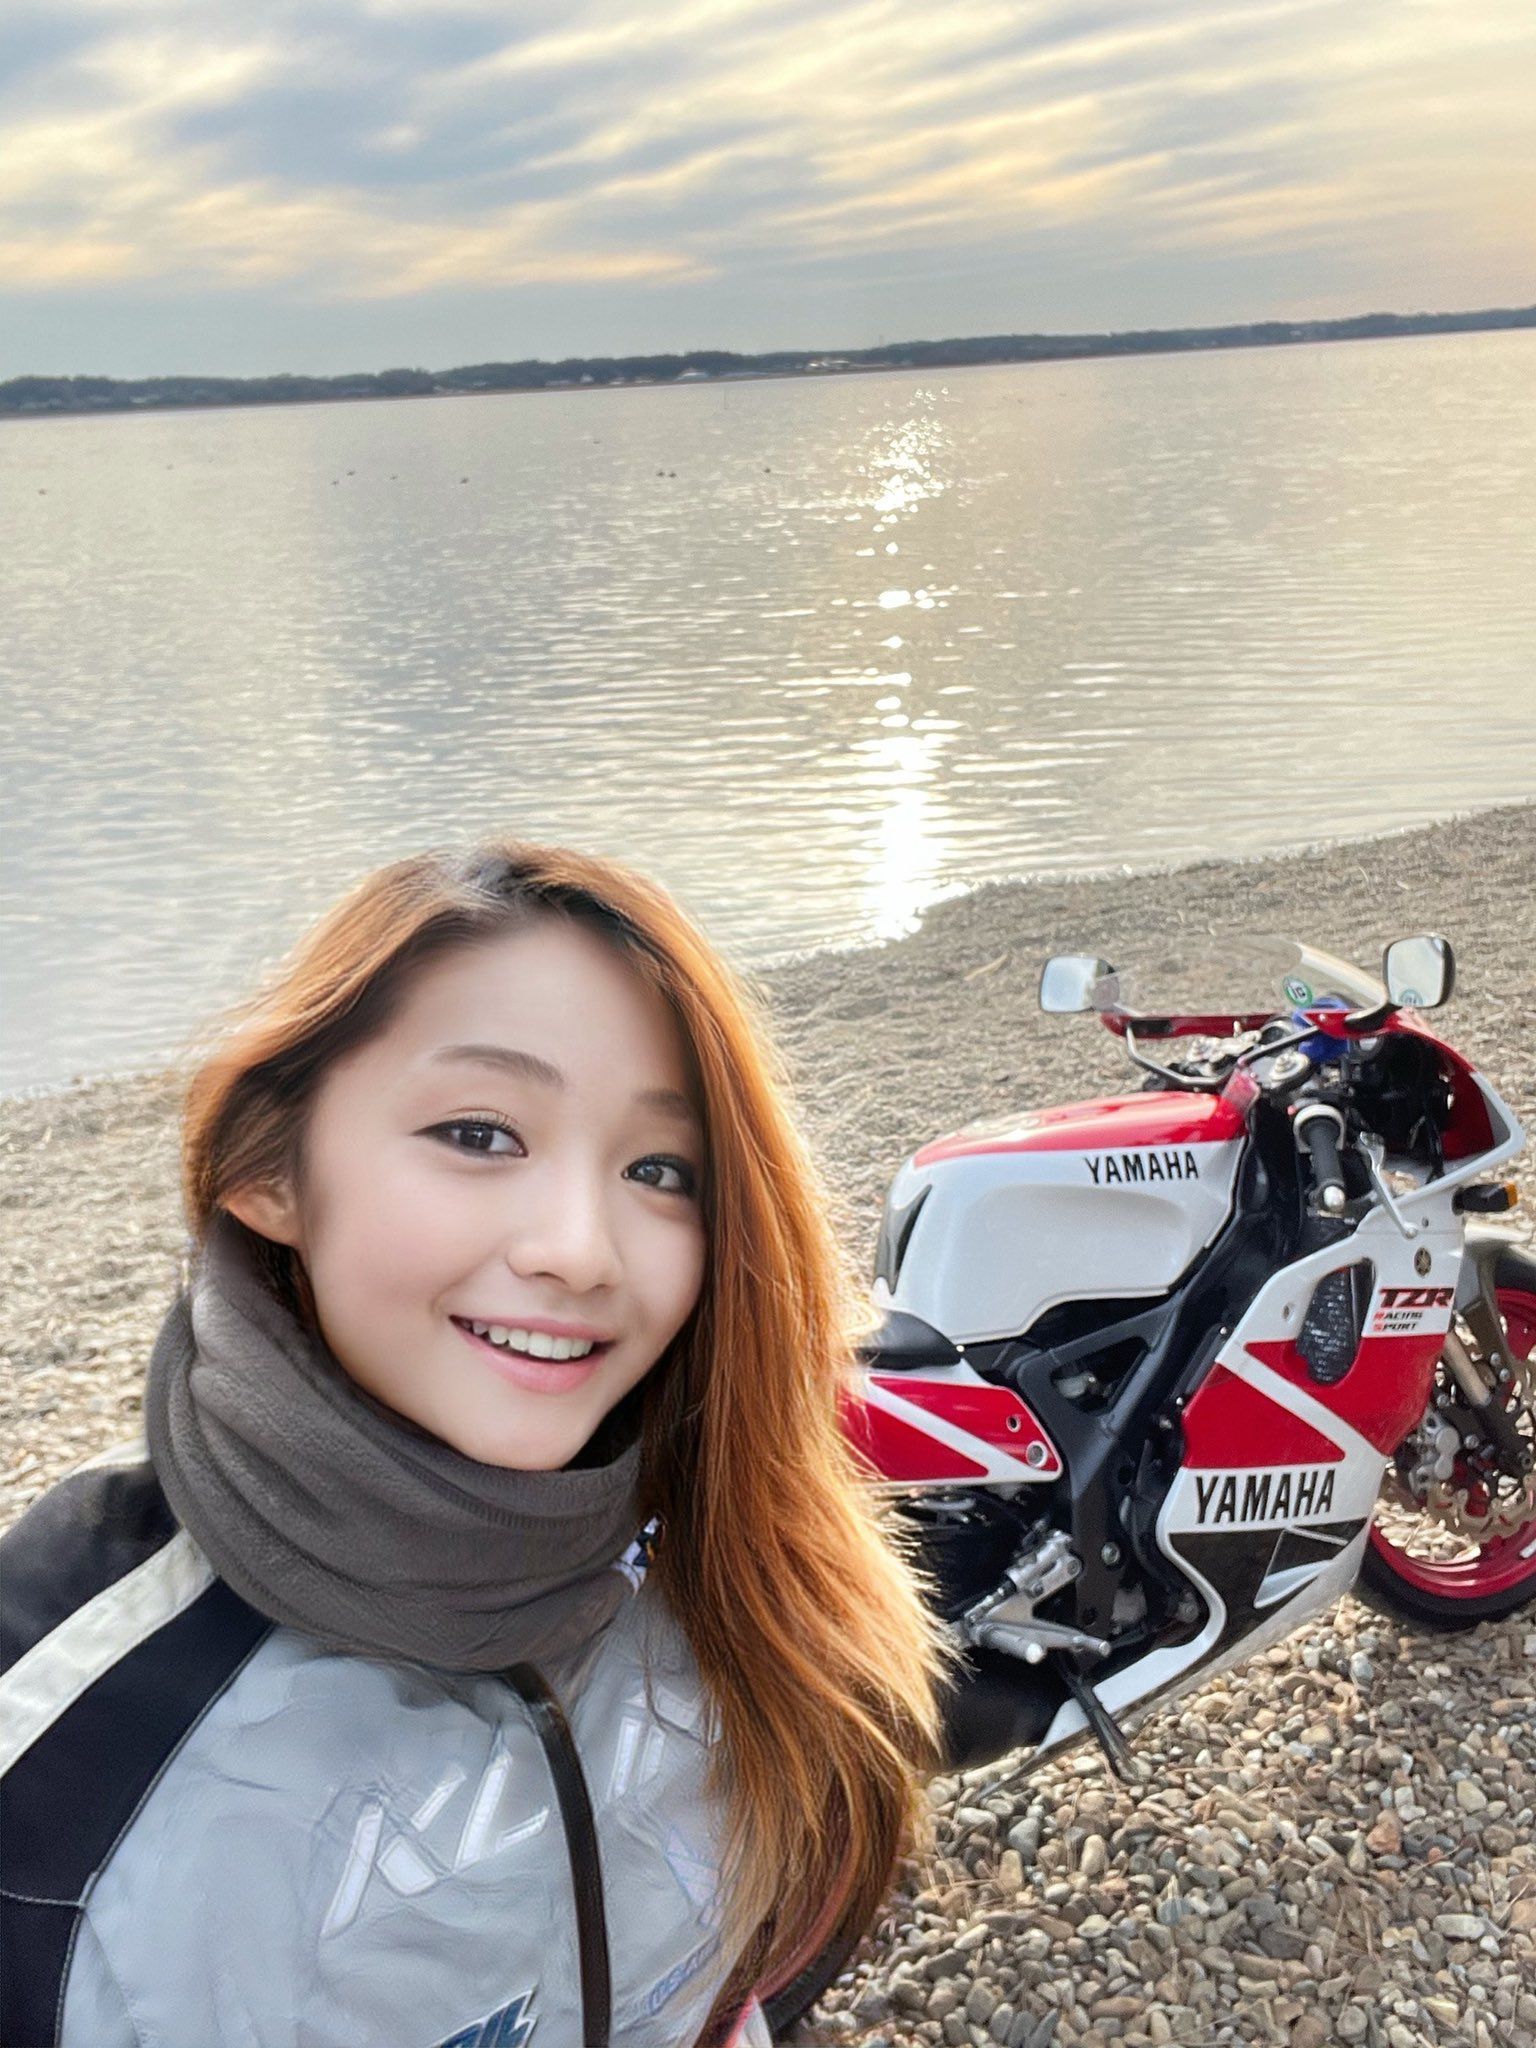 Female Japanese Biker Turns Out To Be A 50 Year Old Man